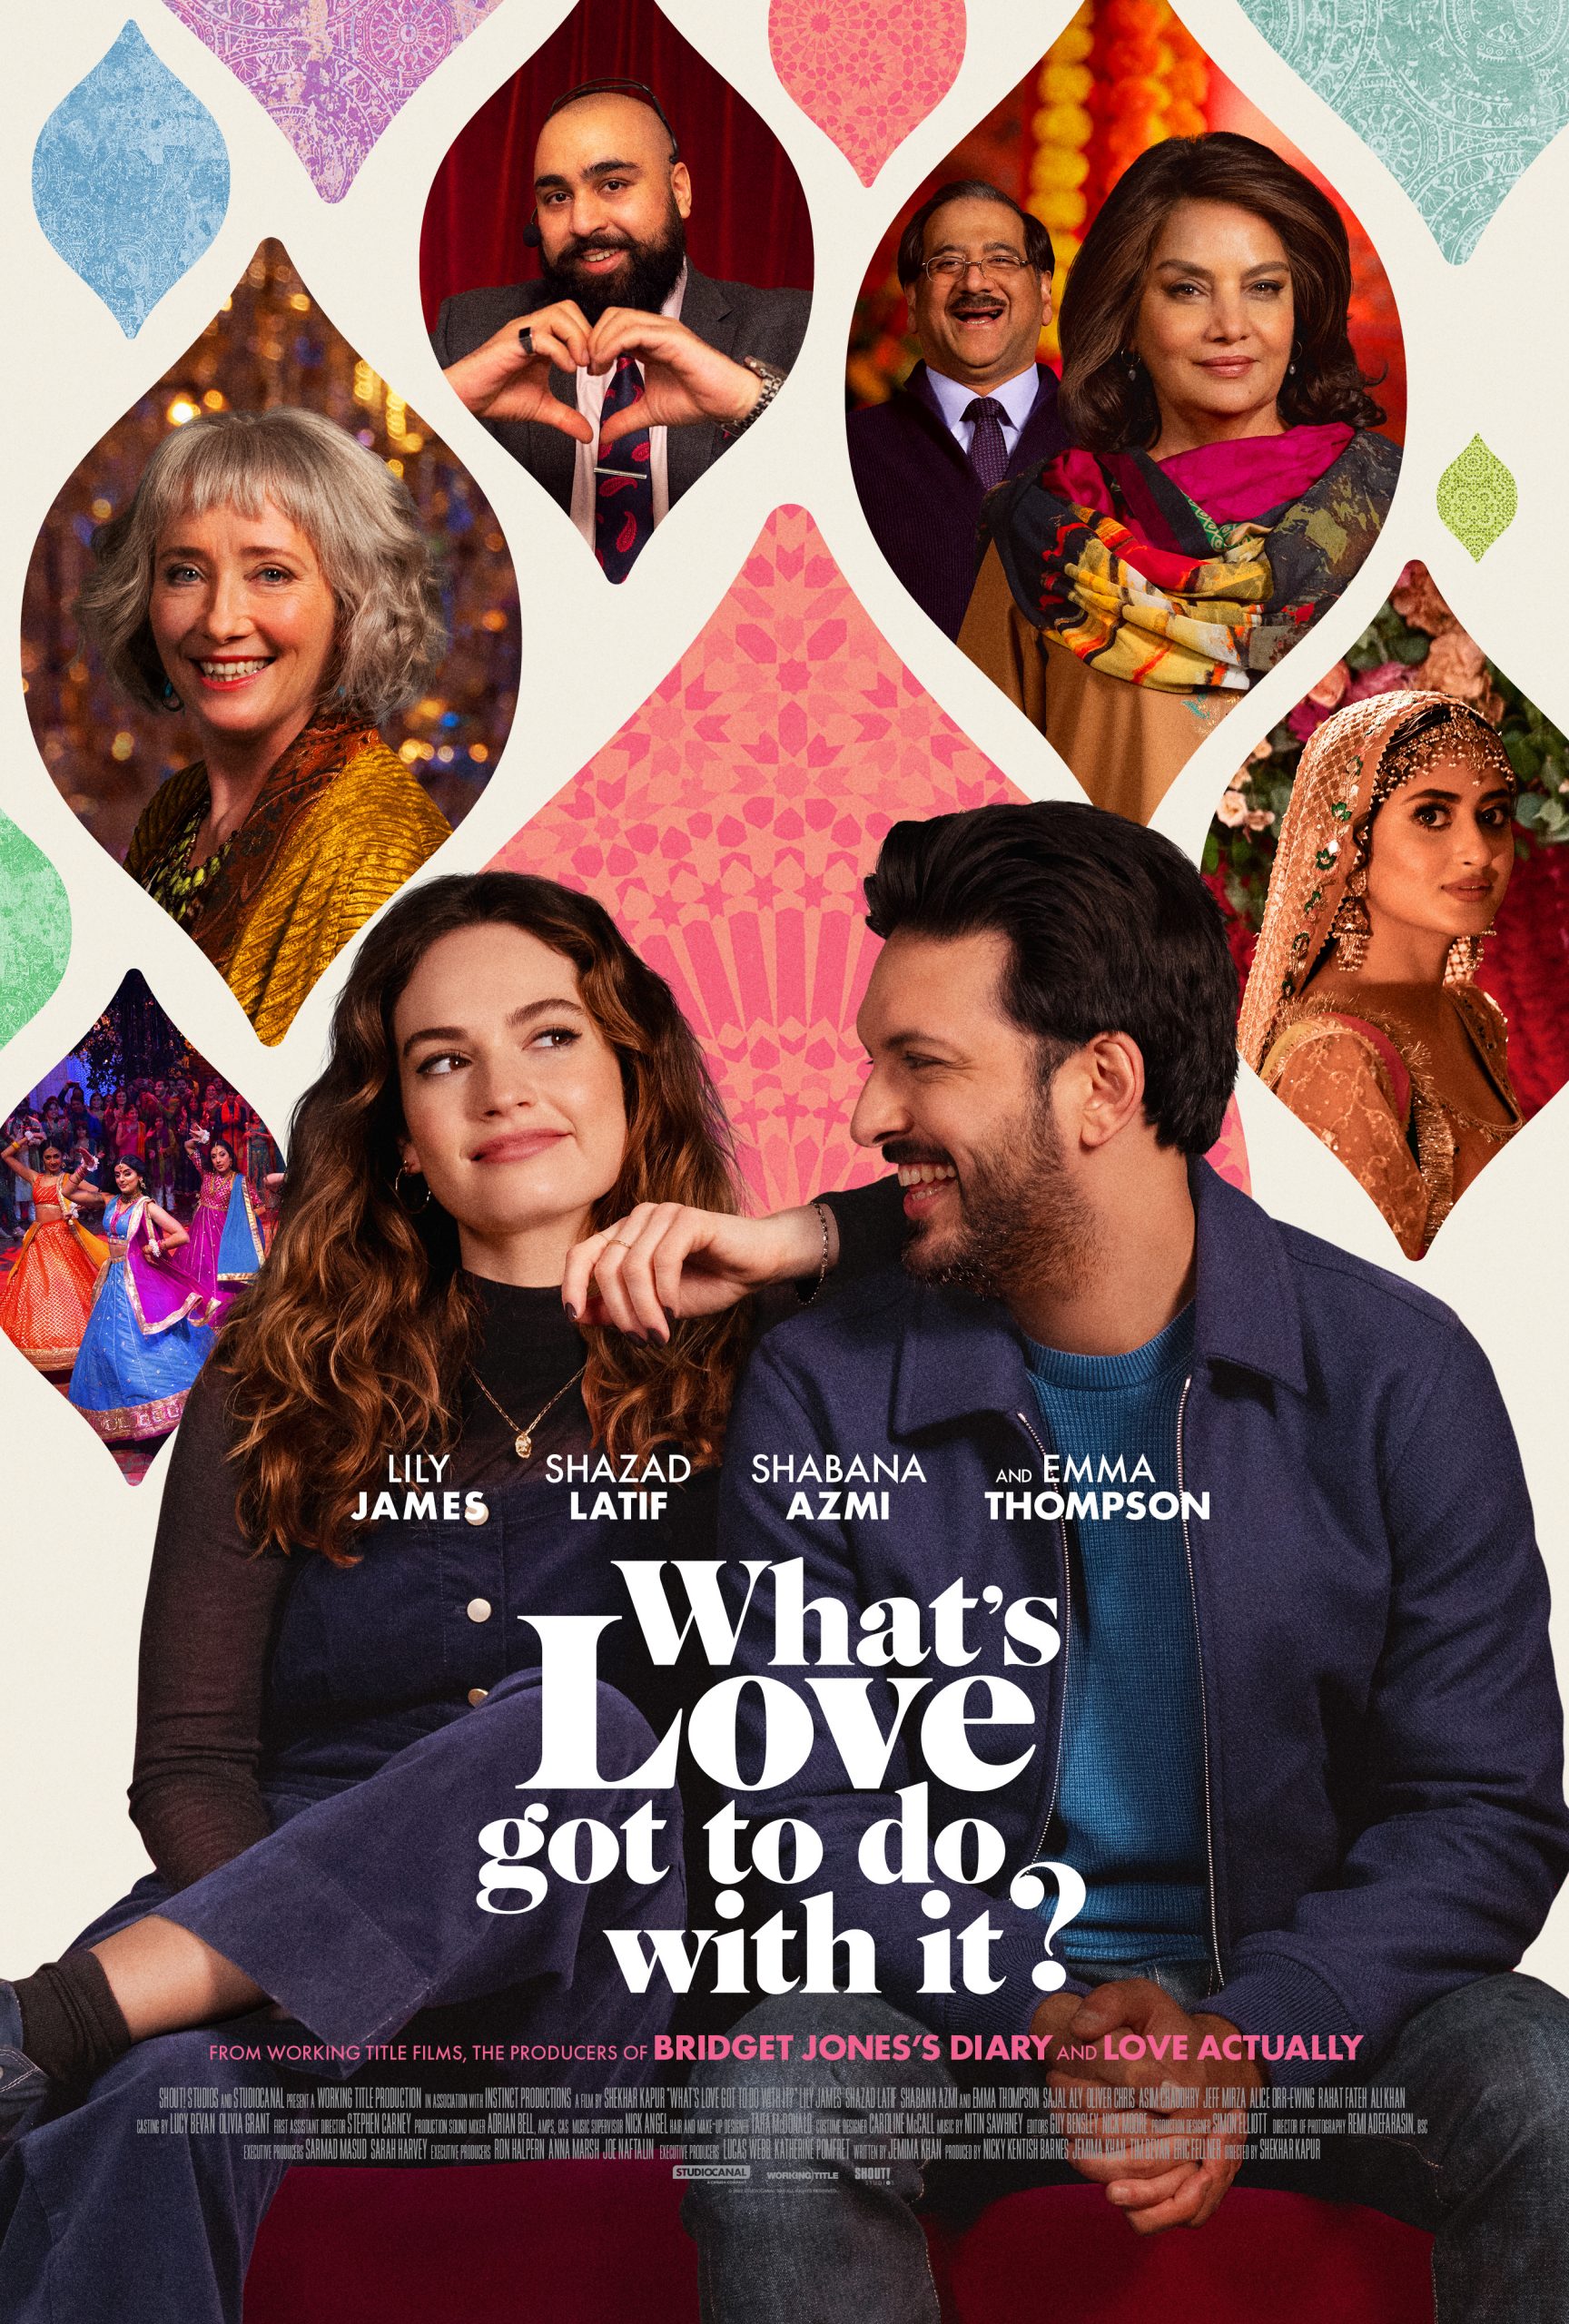 What’s Love Got To Do With It? Movie Review The latest movies, interviews in